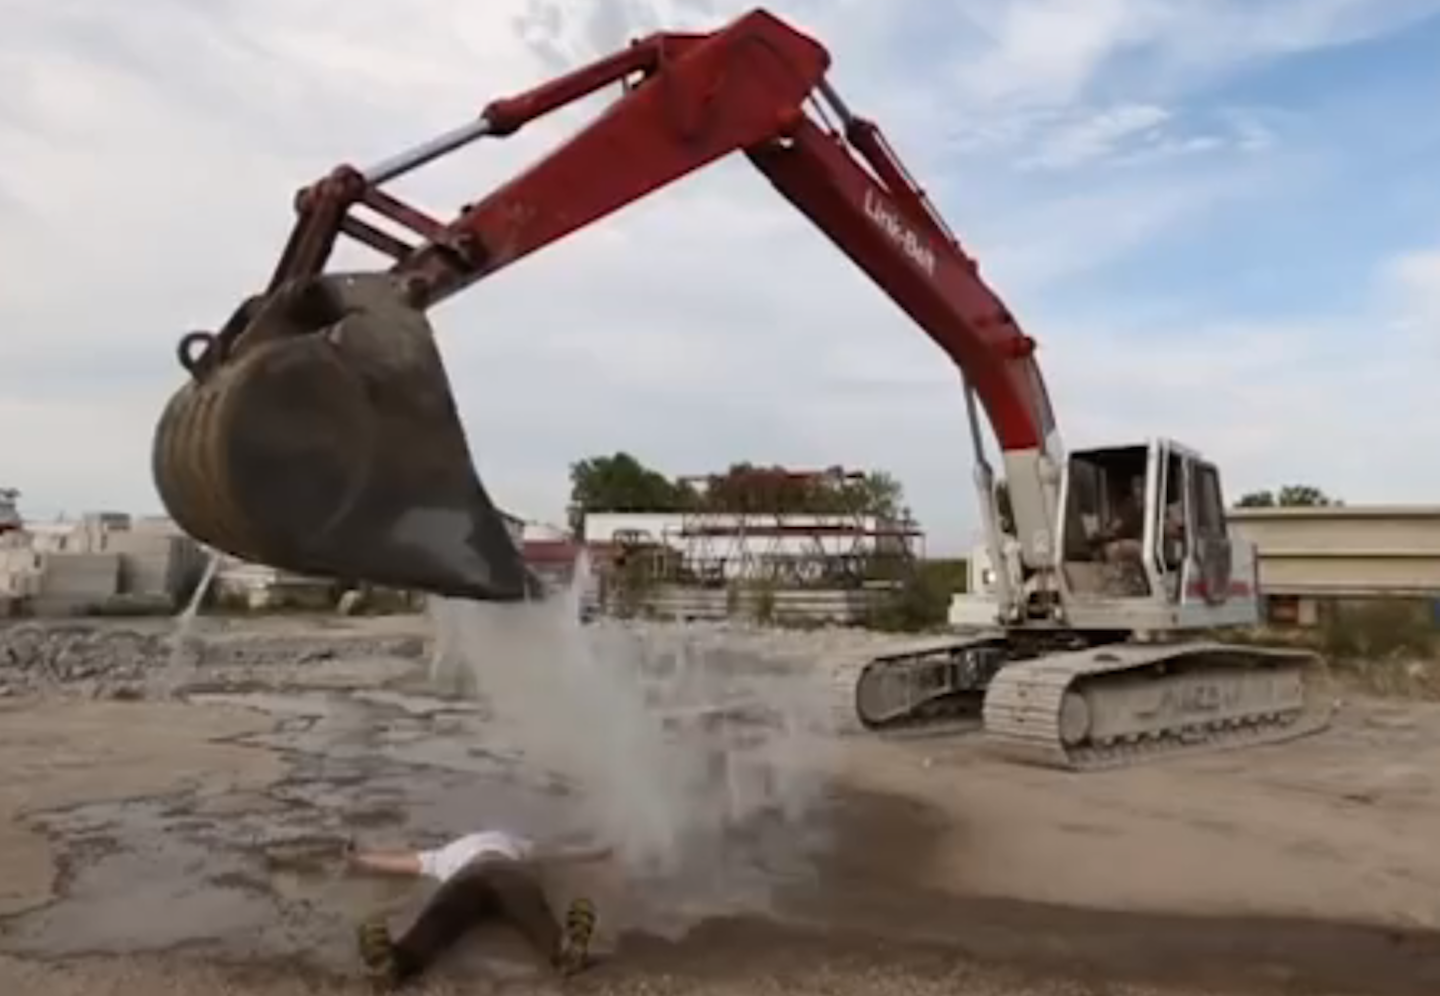 Guy attempts Ice Bucket Challenge with excavator, bucket knocks him out  cold instead | Equipment World